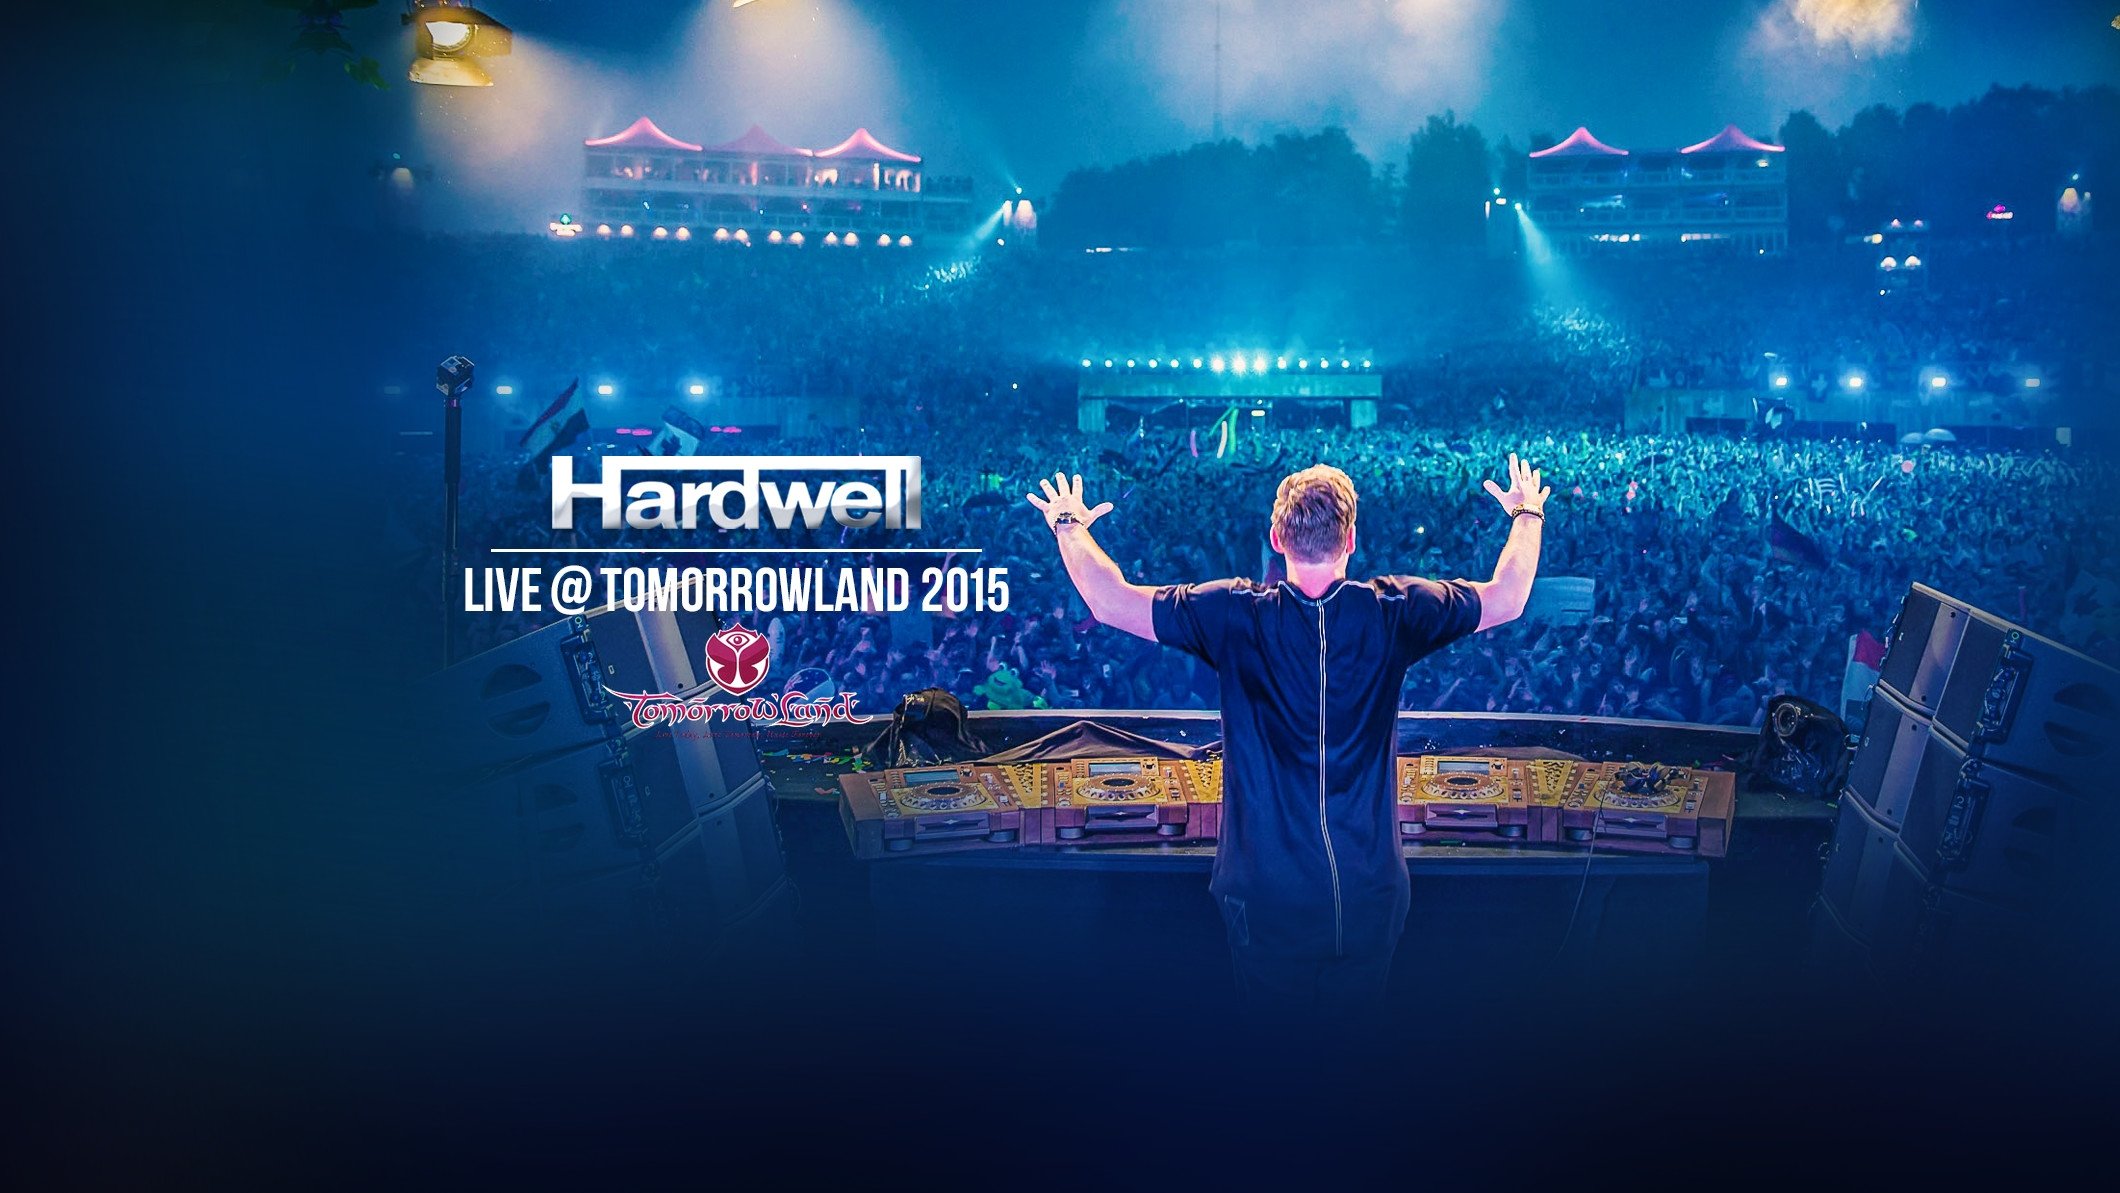 Free download Hardwell Live at Tomorrowland 2015 [FULL HD] HARDWELL  [2120x1193] for your Desktop, Mobile & Tablet | Explore 90+ DJ Hardwell  Wallpapers | Dj Mixer Wallpaper, Dj Wallpapers, Dj Backgrounds